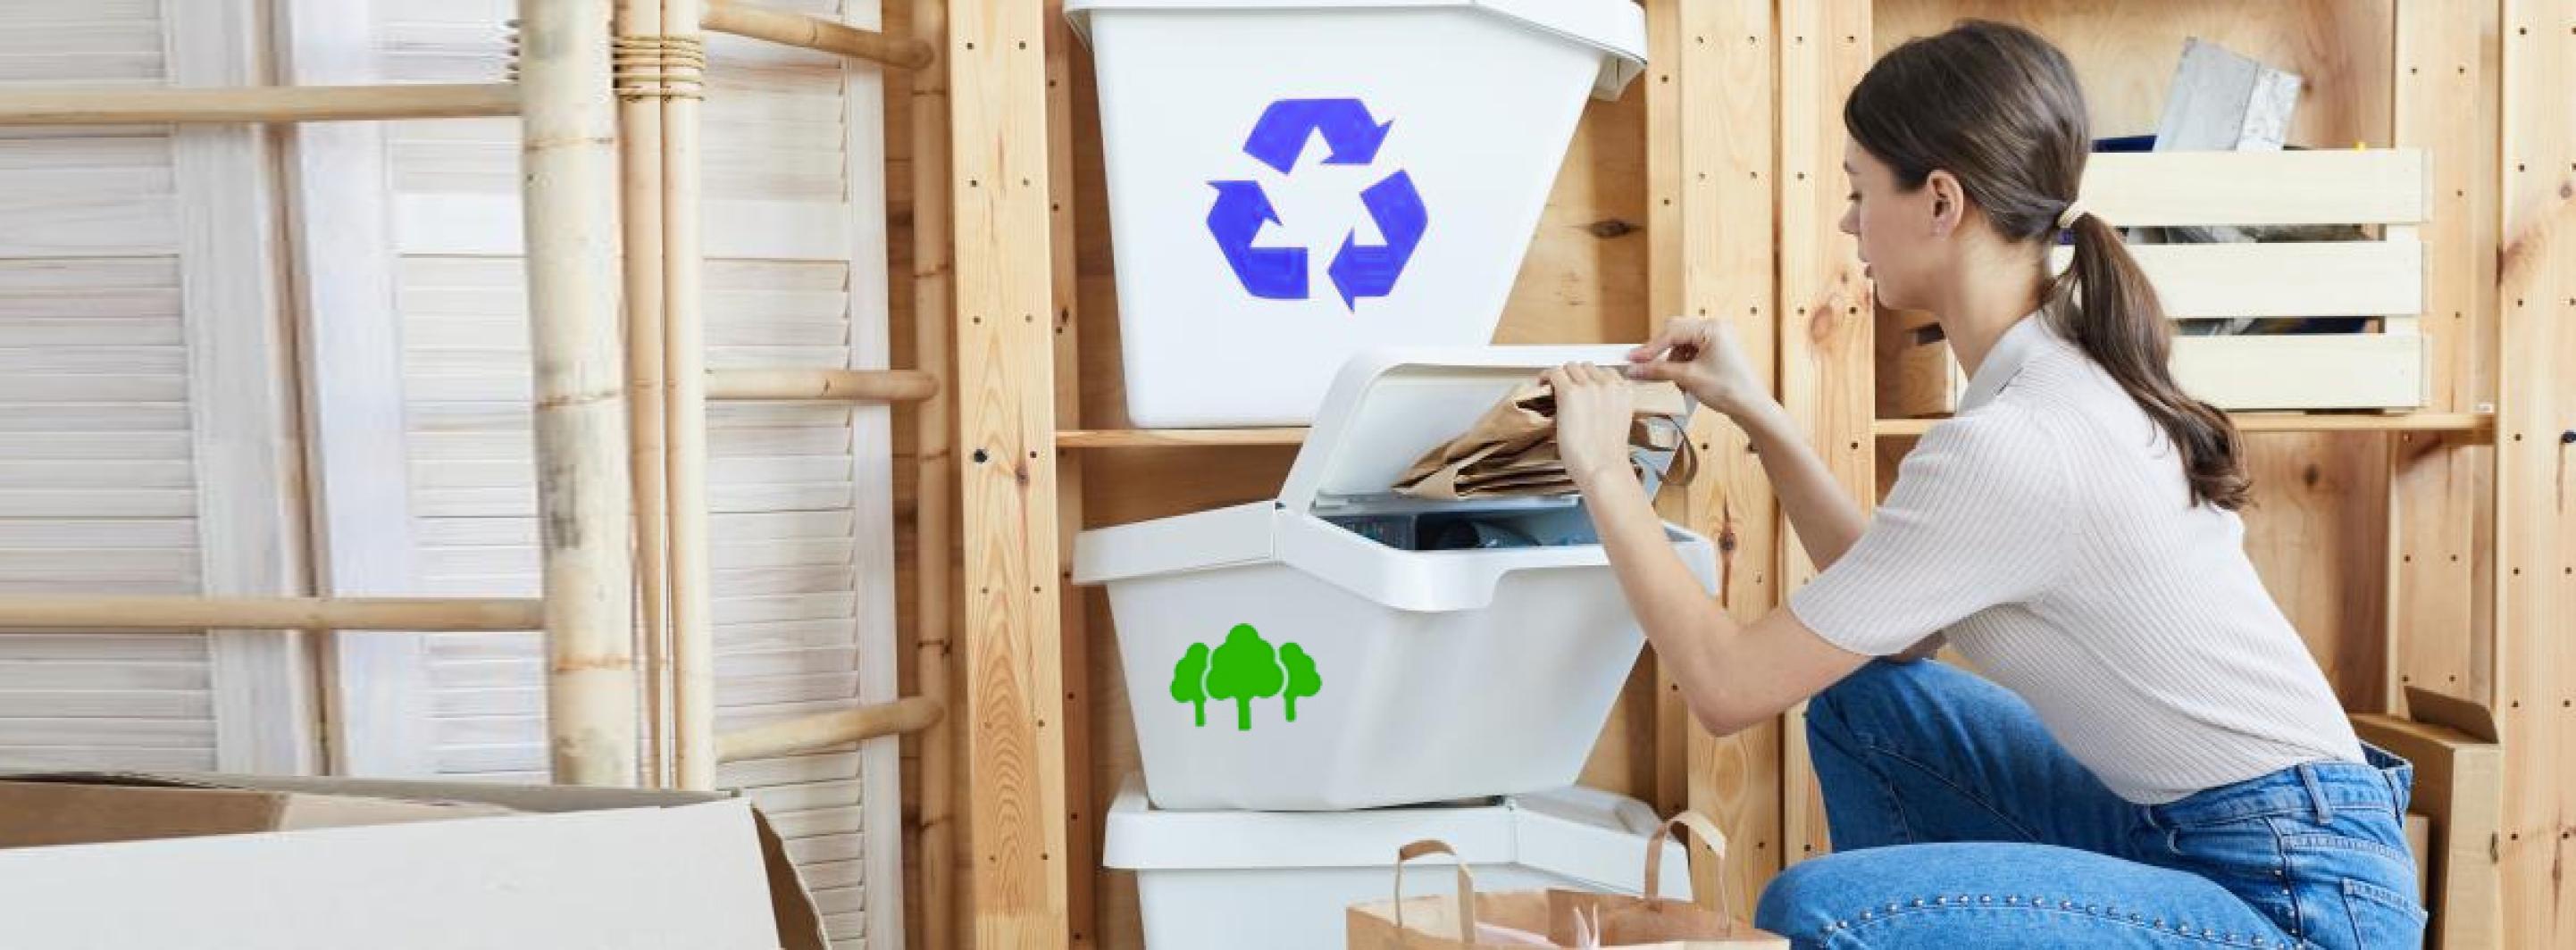 Are Receipts Recyclable? Discover Sustainable Solutions!